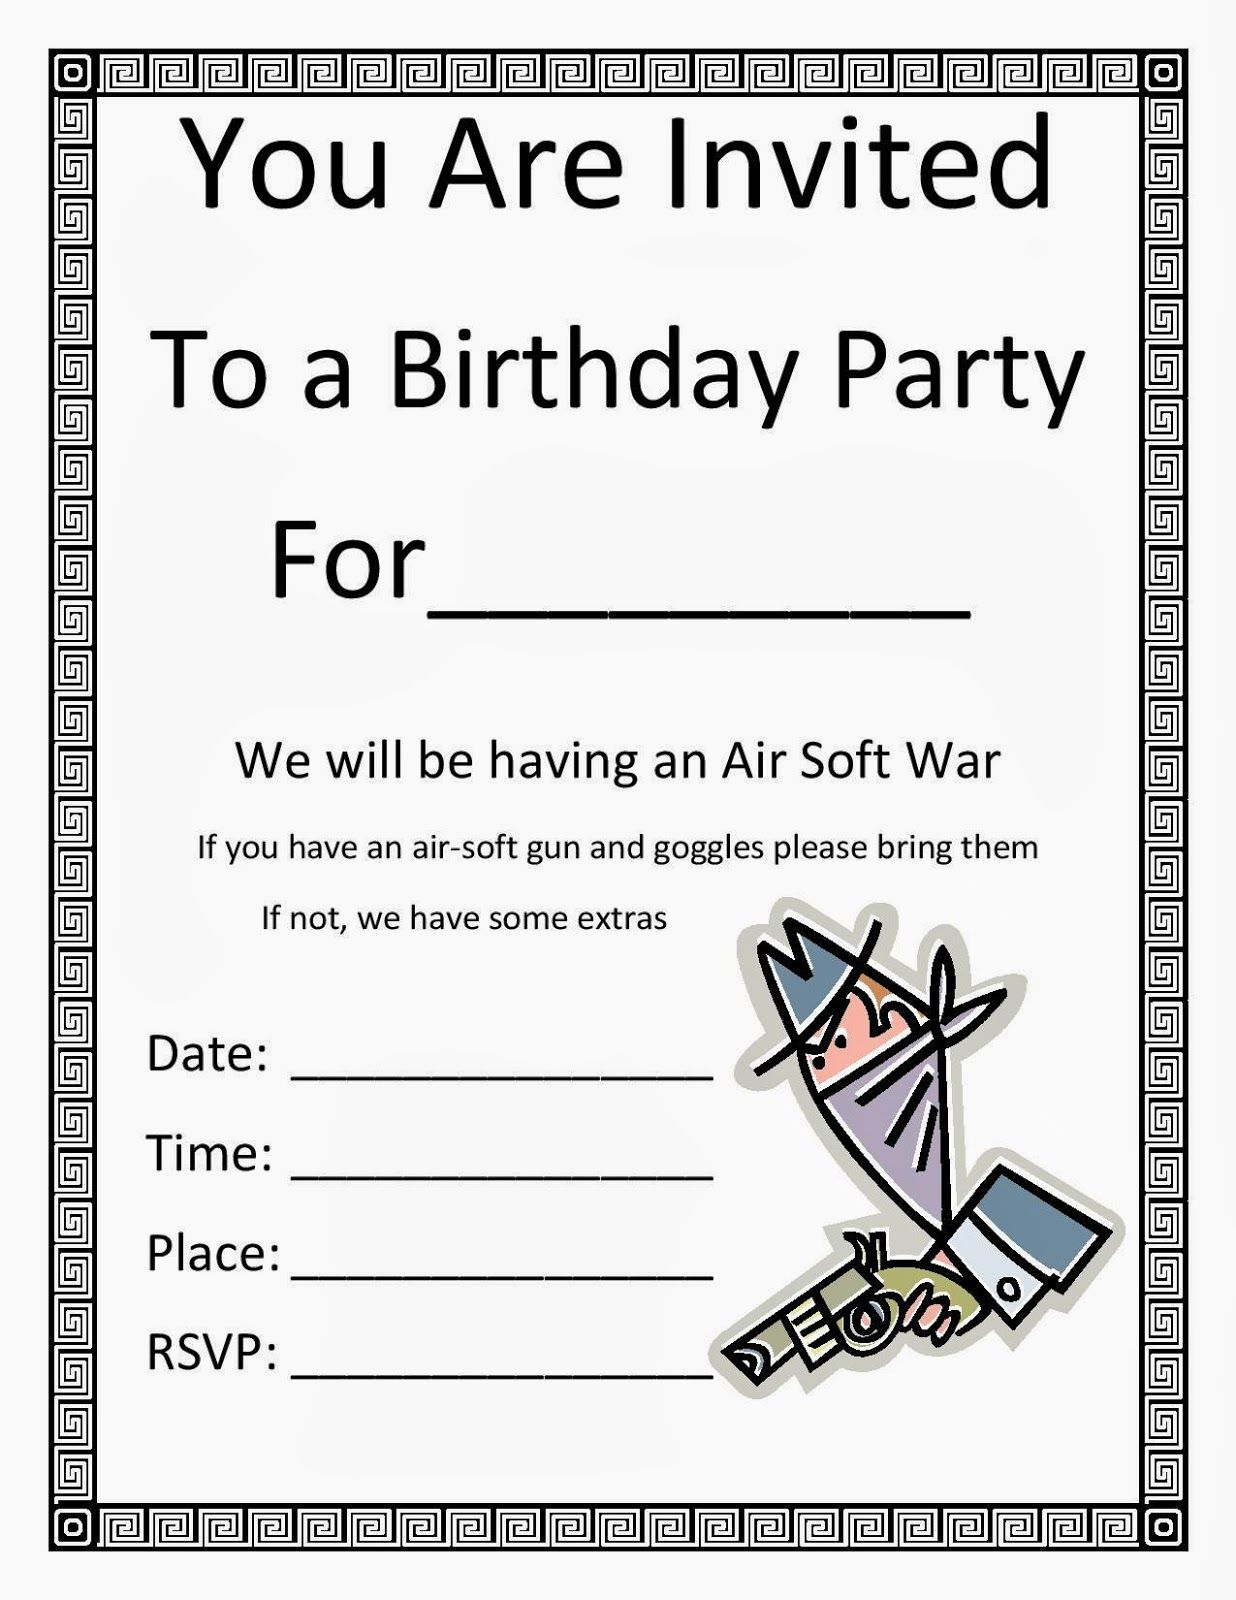 Free Birthday Party Invitation Template Along With All The in dimensions 1236 X 1600